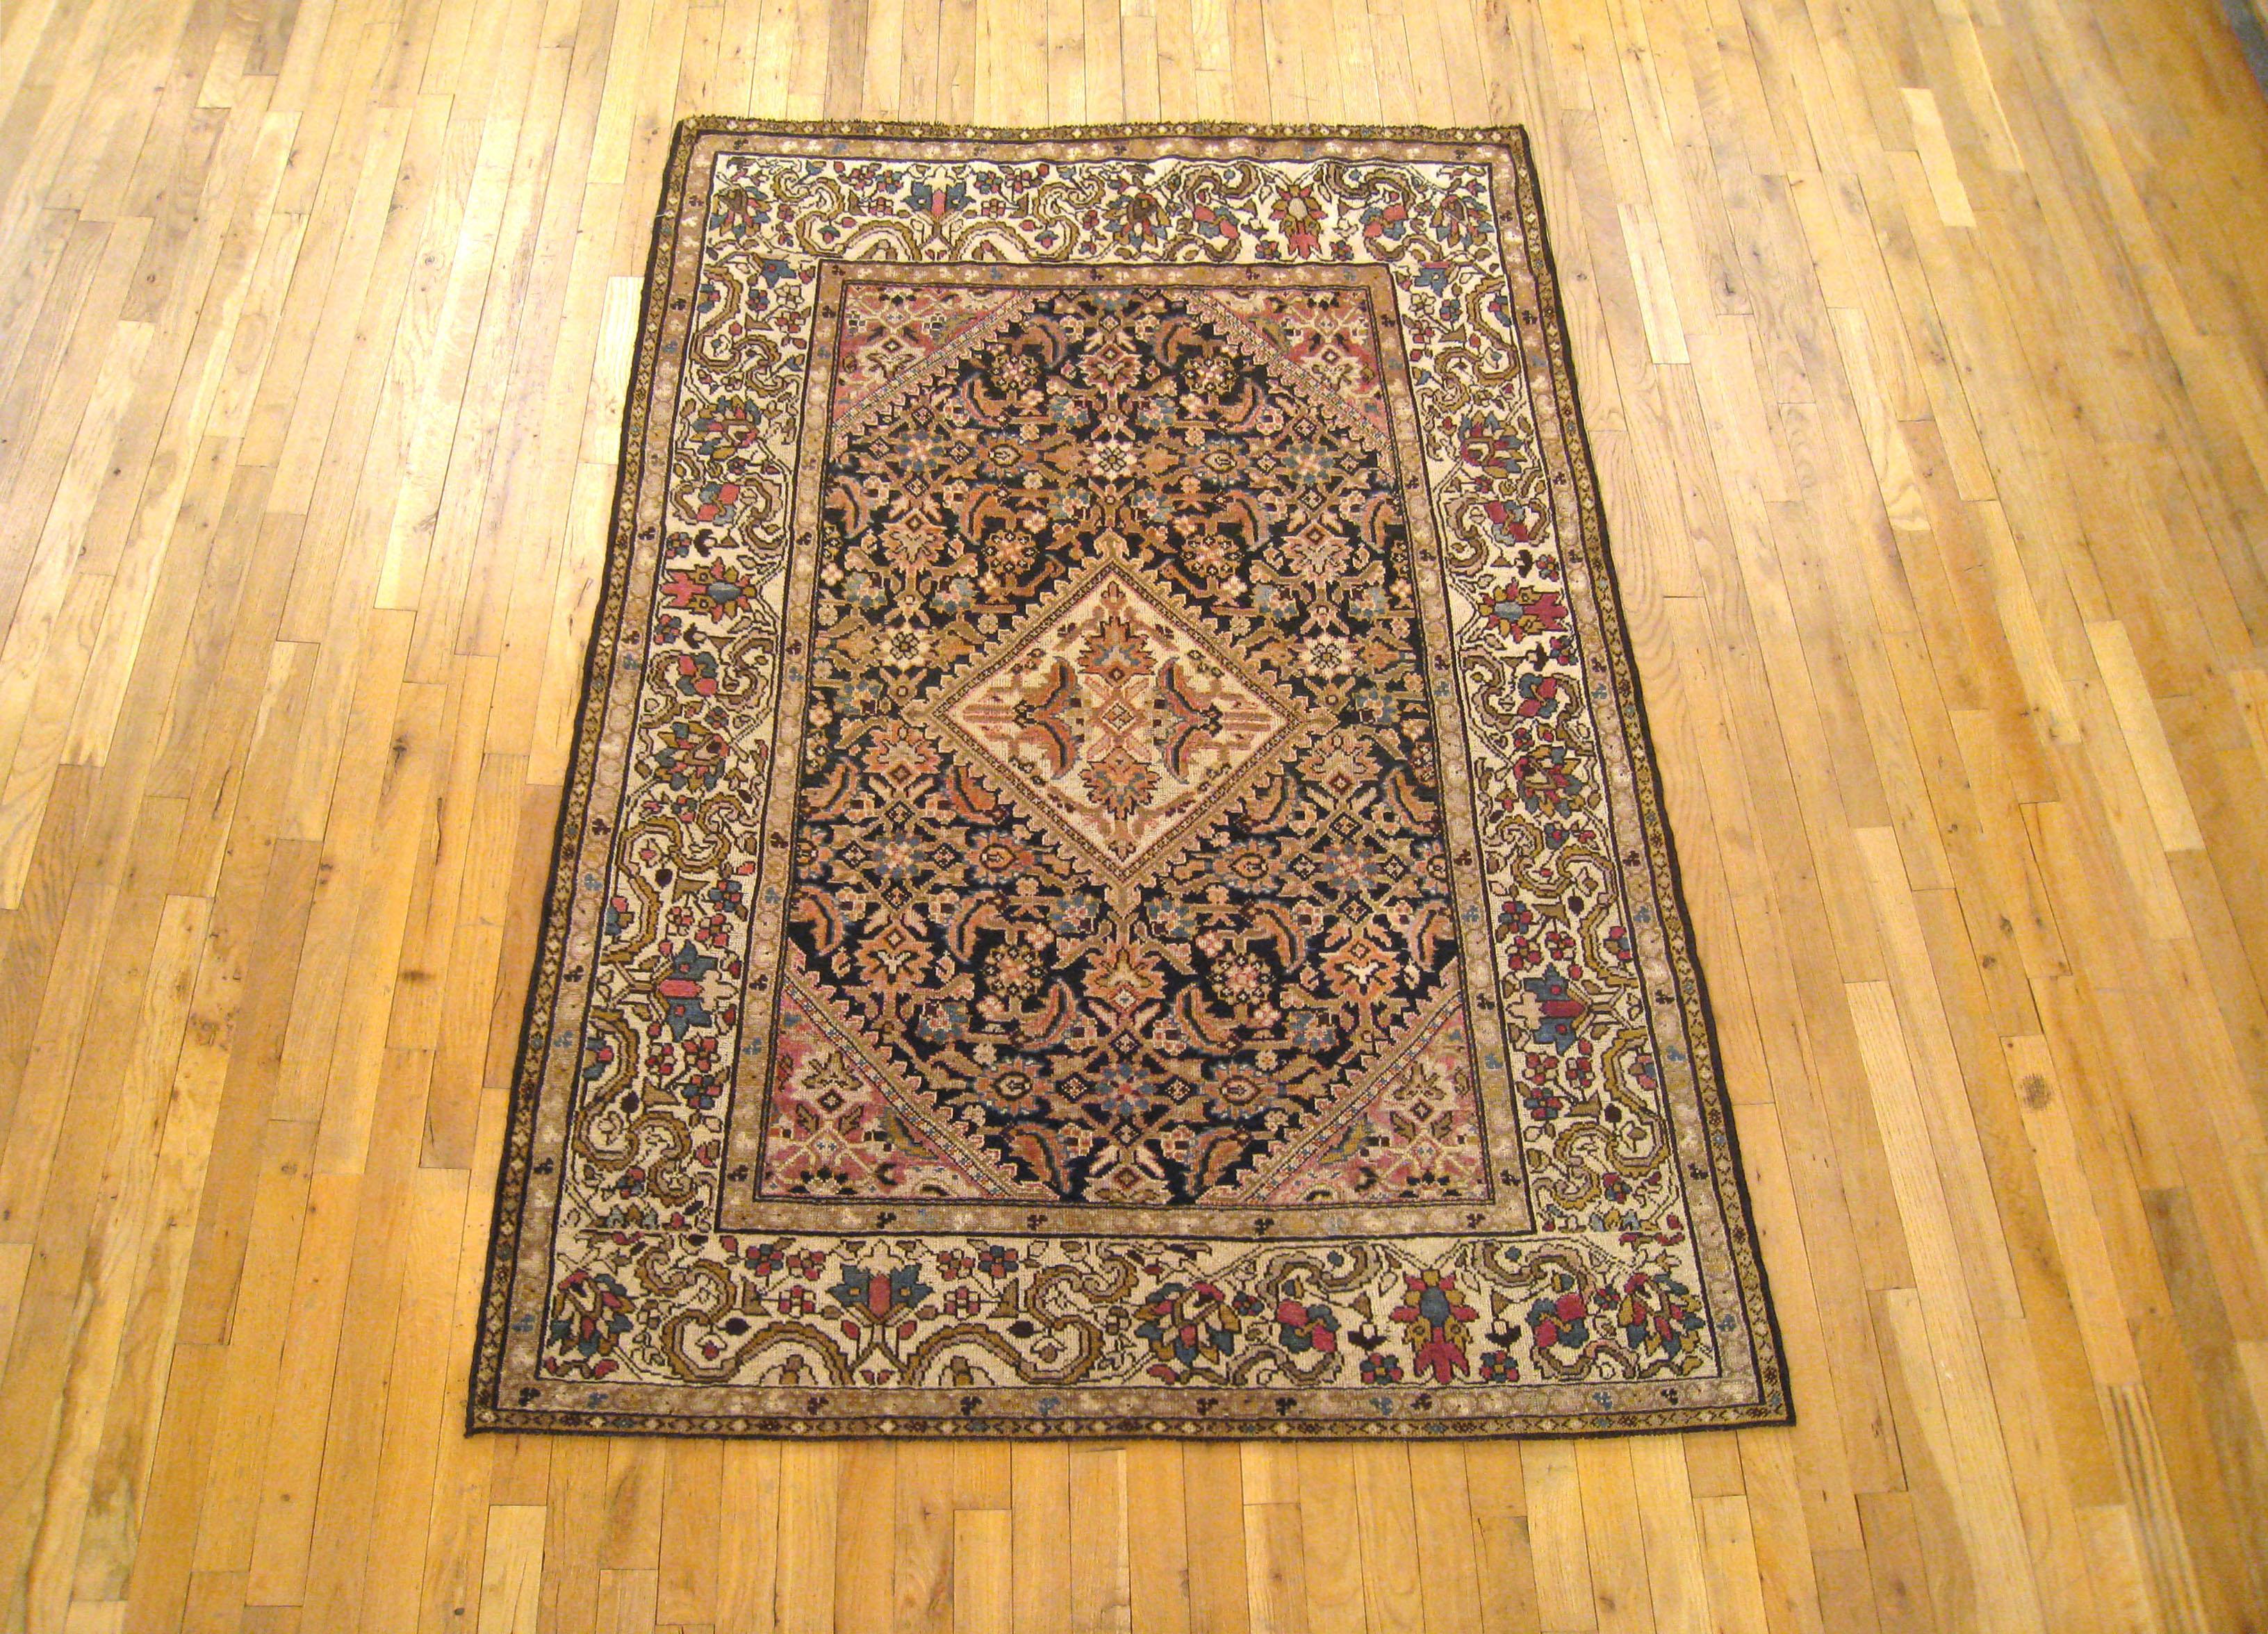 Antique Persian Malayer Oriental rug in Small Size with Ivory Medallion & Border

An antique Persian Malayer oriental rug, circa 1920. Size 6'6